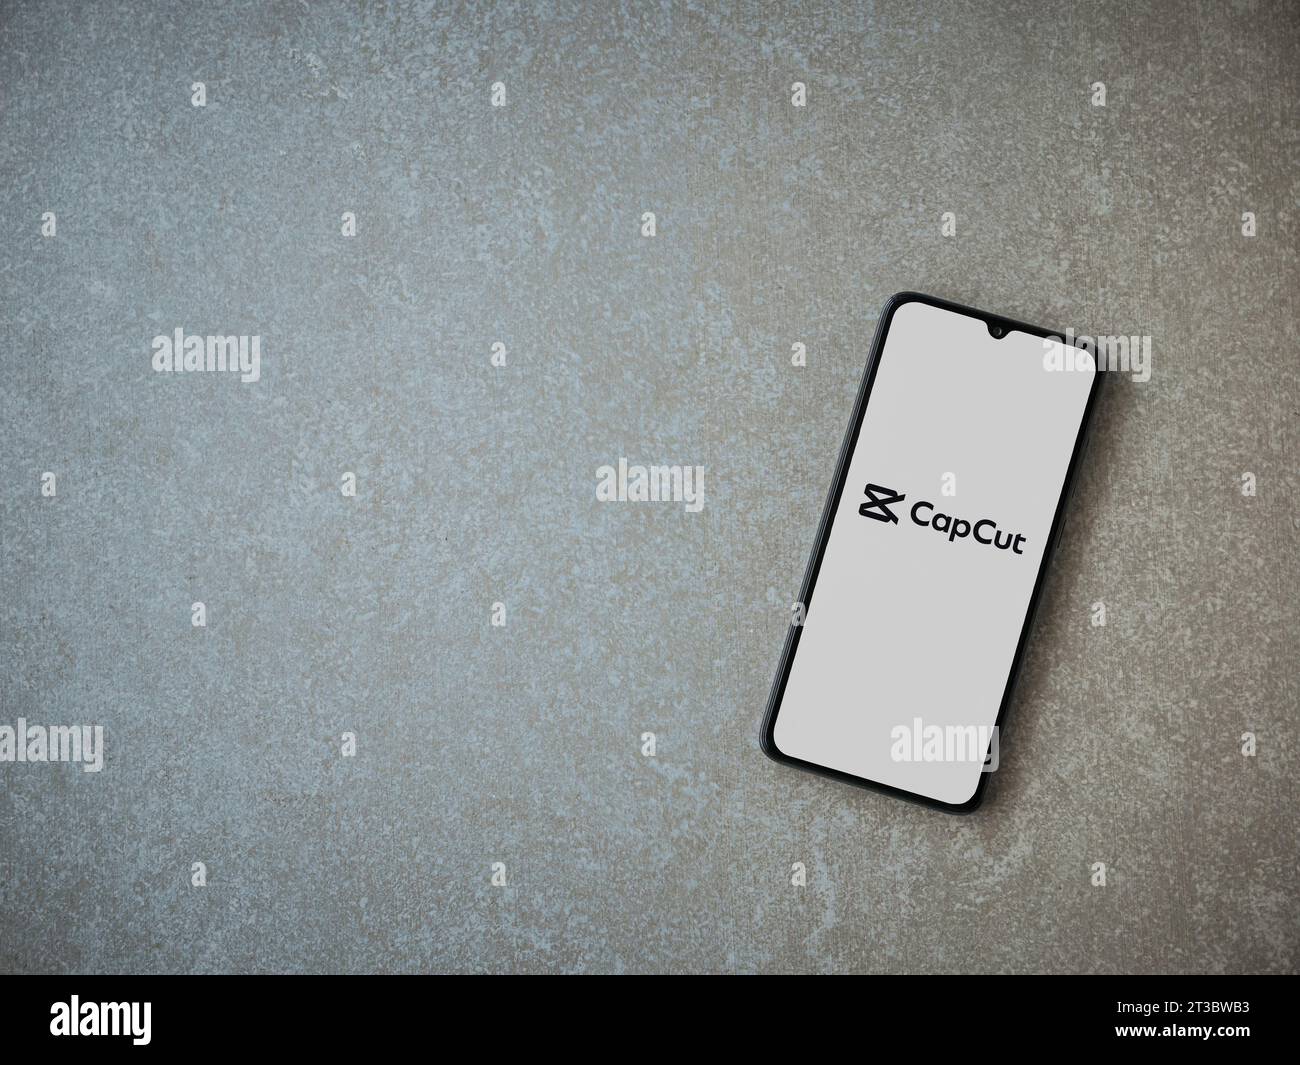 CapCut App Play Store Page on Smartphone on Ceramic Stone Background.  Editorial Stock Photo - Image of view, black: 284683488